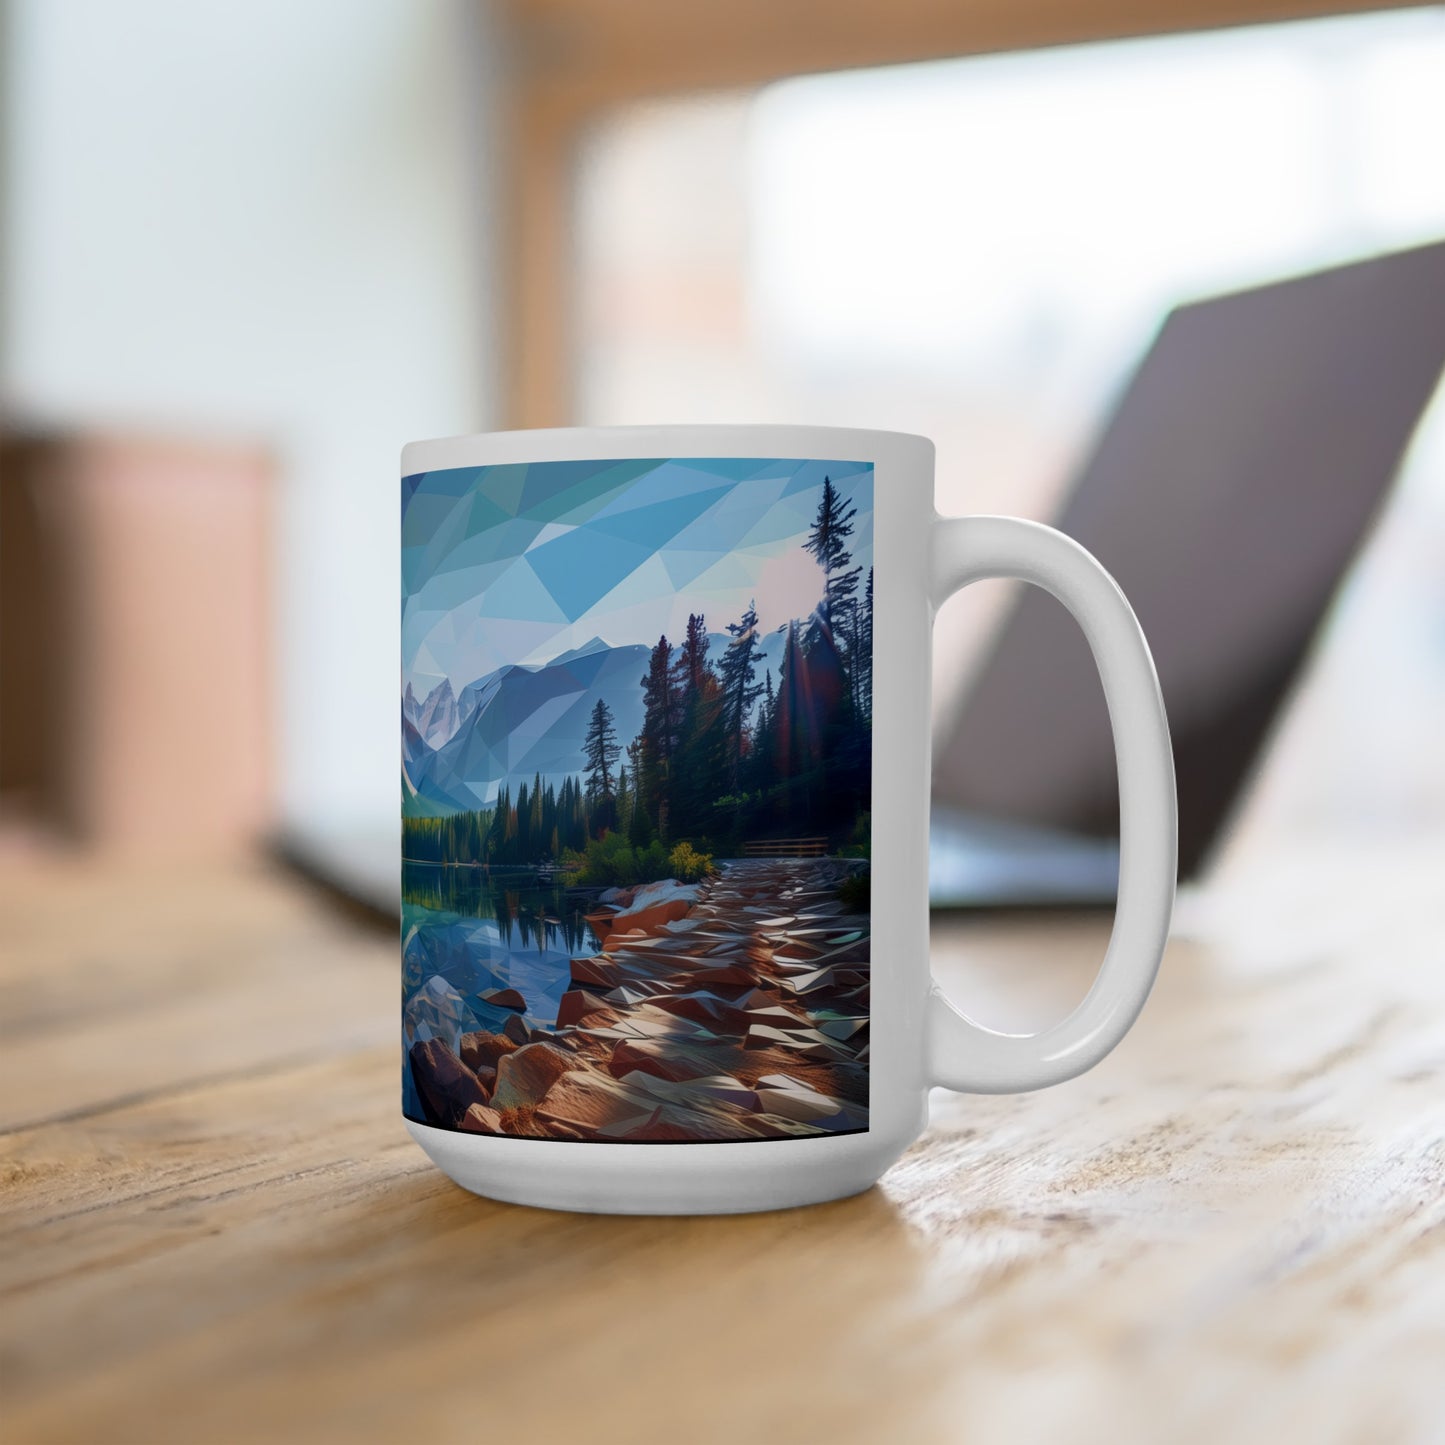 Large Collectible Coffee Mug with Rocky Mountain National Park Design, 15oz